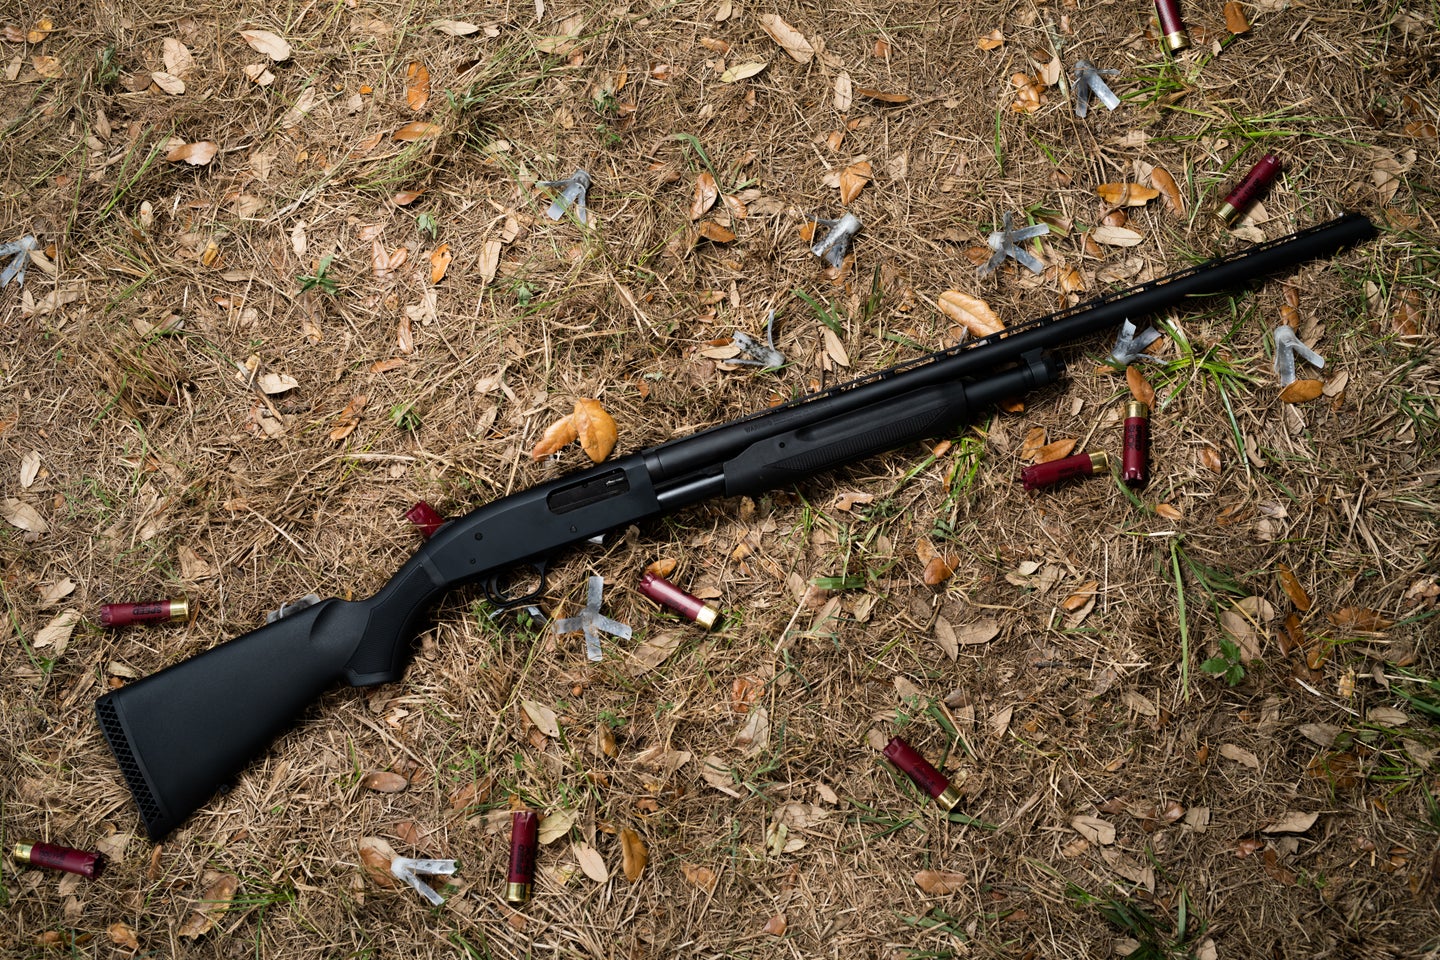 The Mossberg 500 hunting is a best shotgun for the money